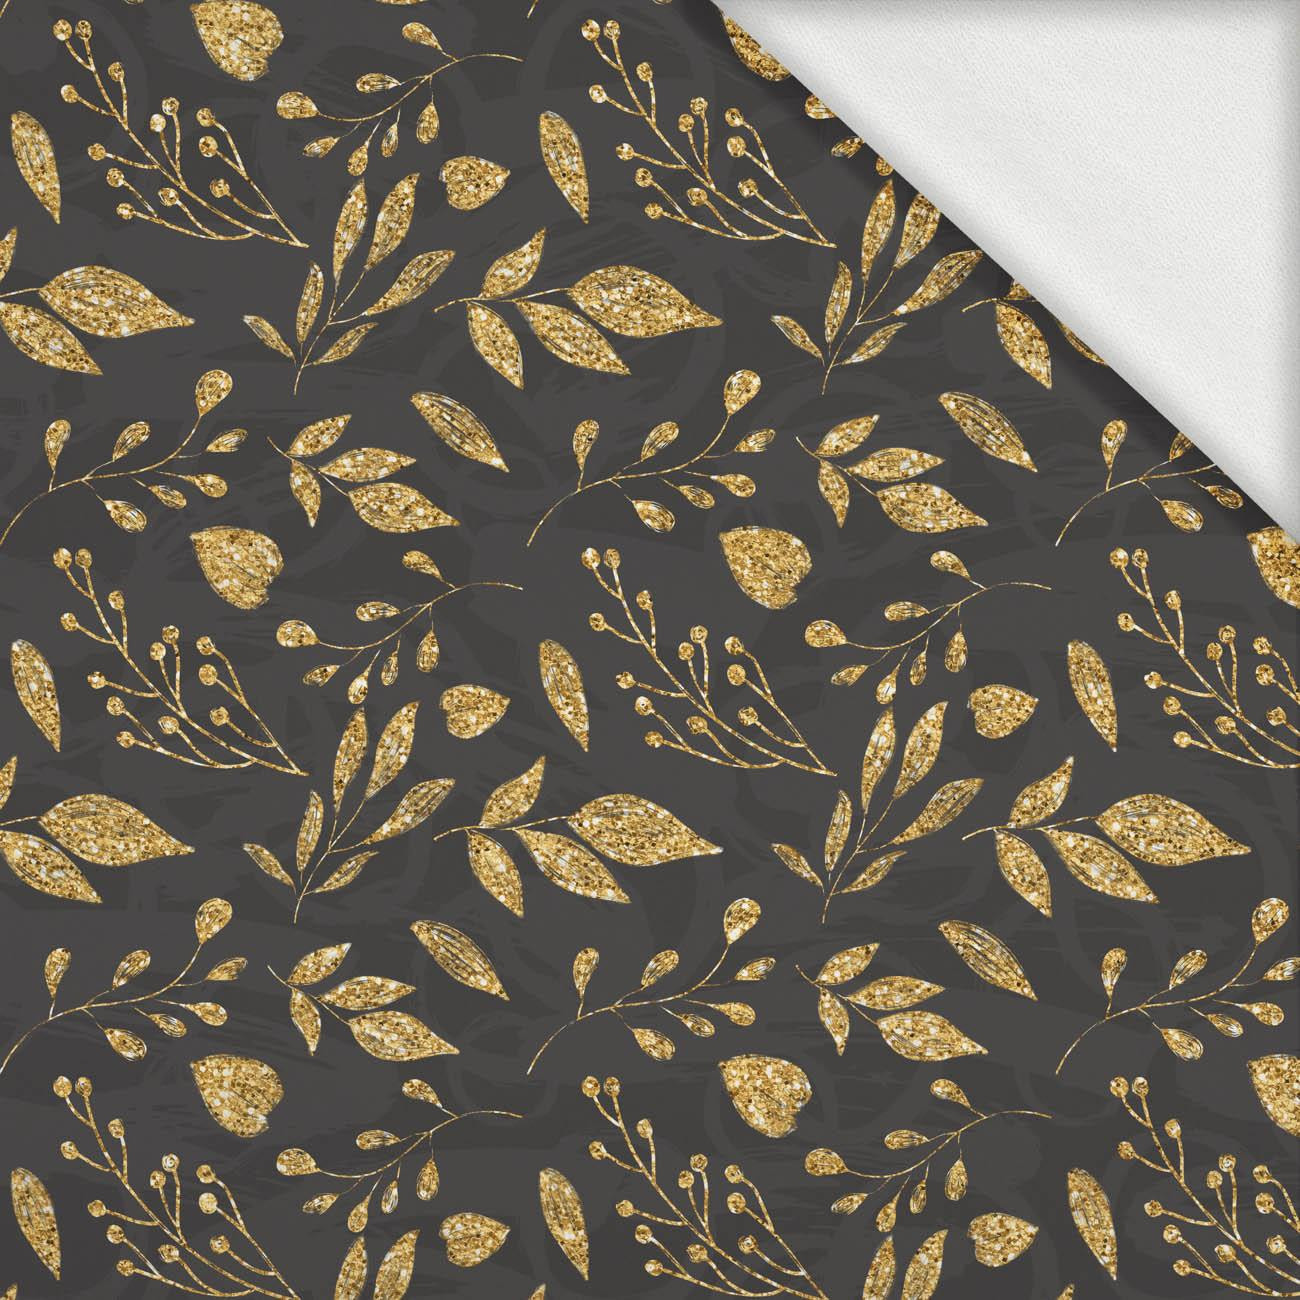 LEAVES pat. 11 (gold) / black  - looped knit fabric with elastane